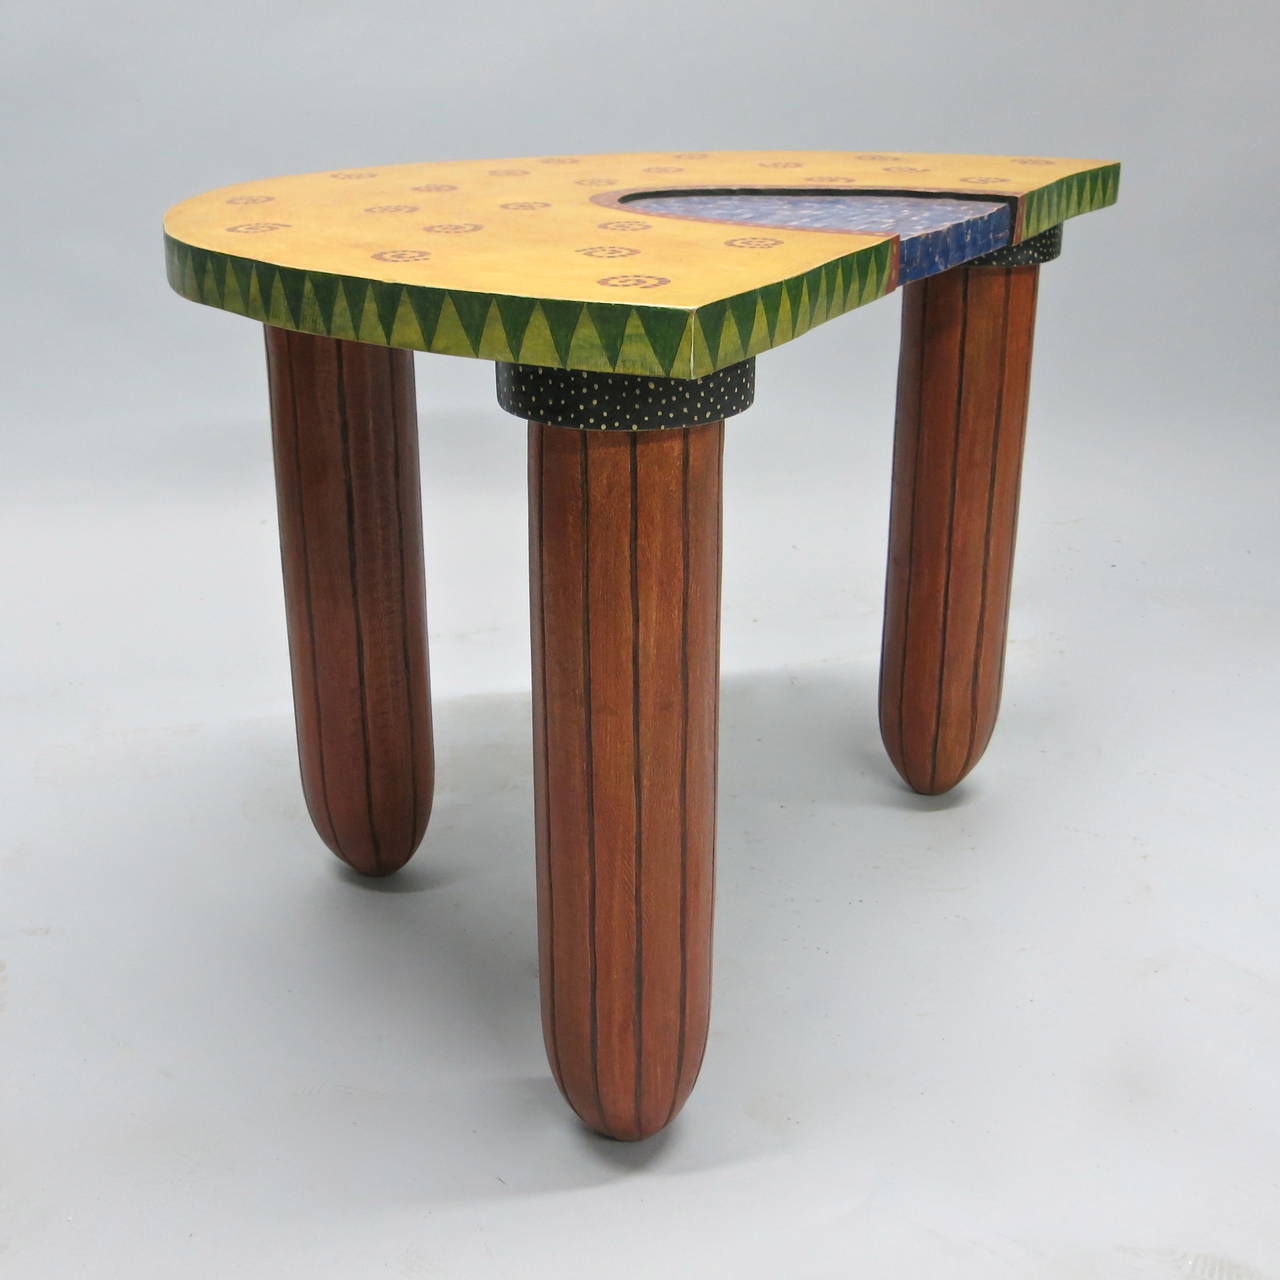 Pair of wooden side tables by Fabiane Garcia with nice artistic and quality characteristics that embody very good use of color. Each table has three legs and a non-perfect demilune shaped top that is accented nicely with a carved texture center in